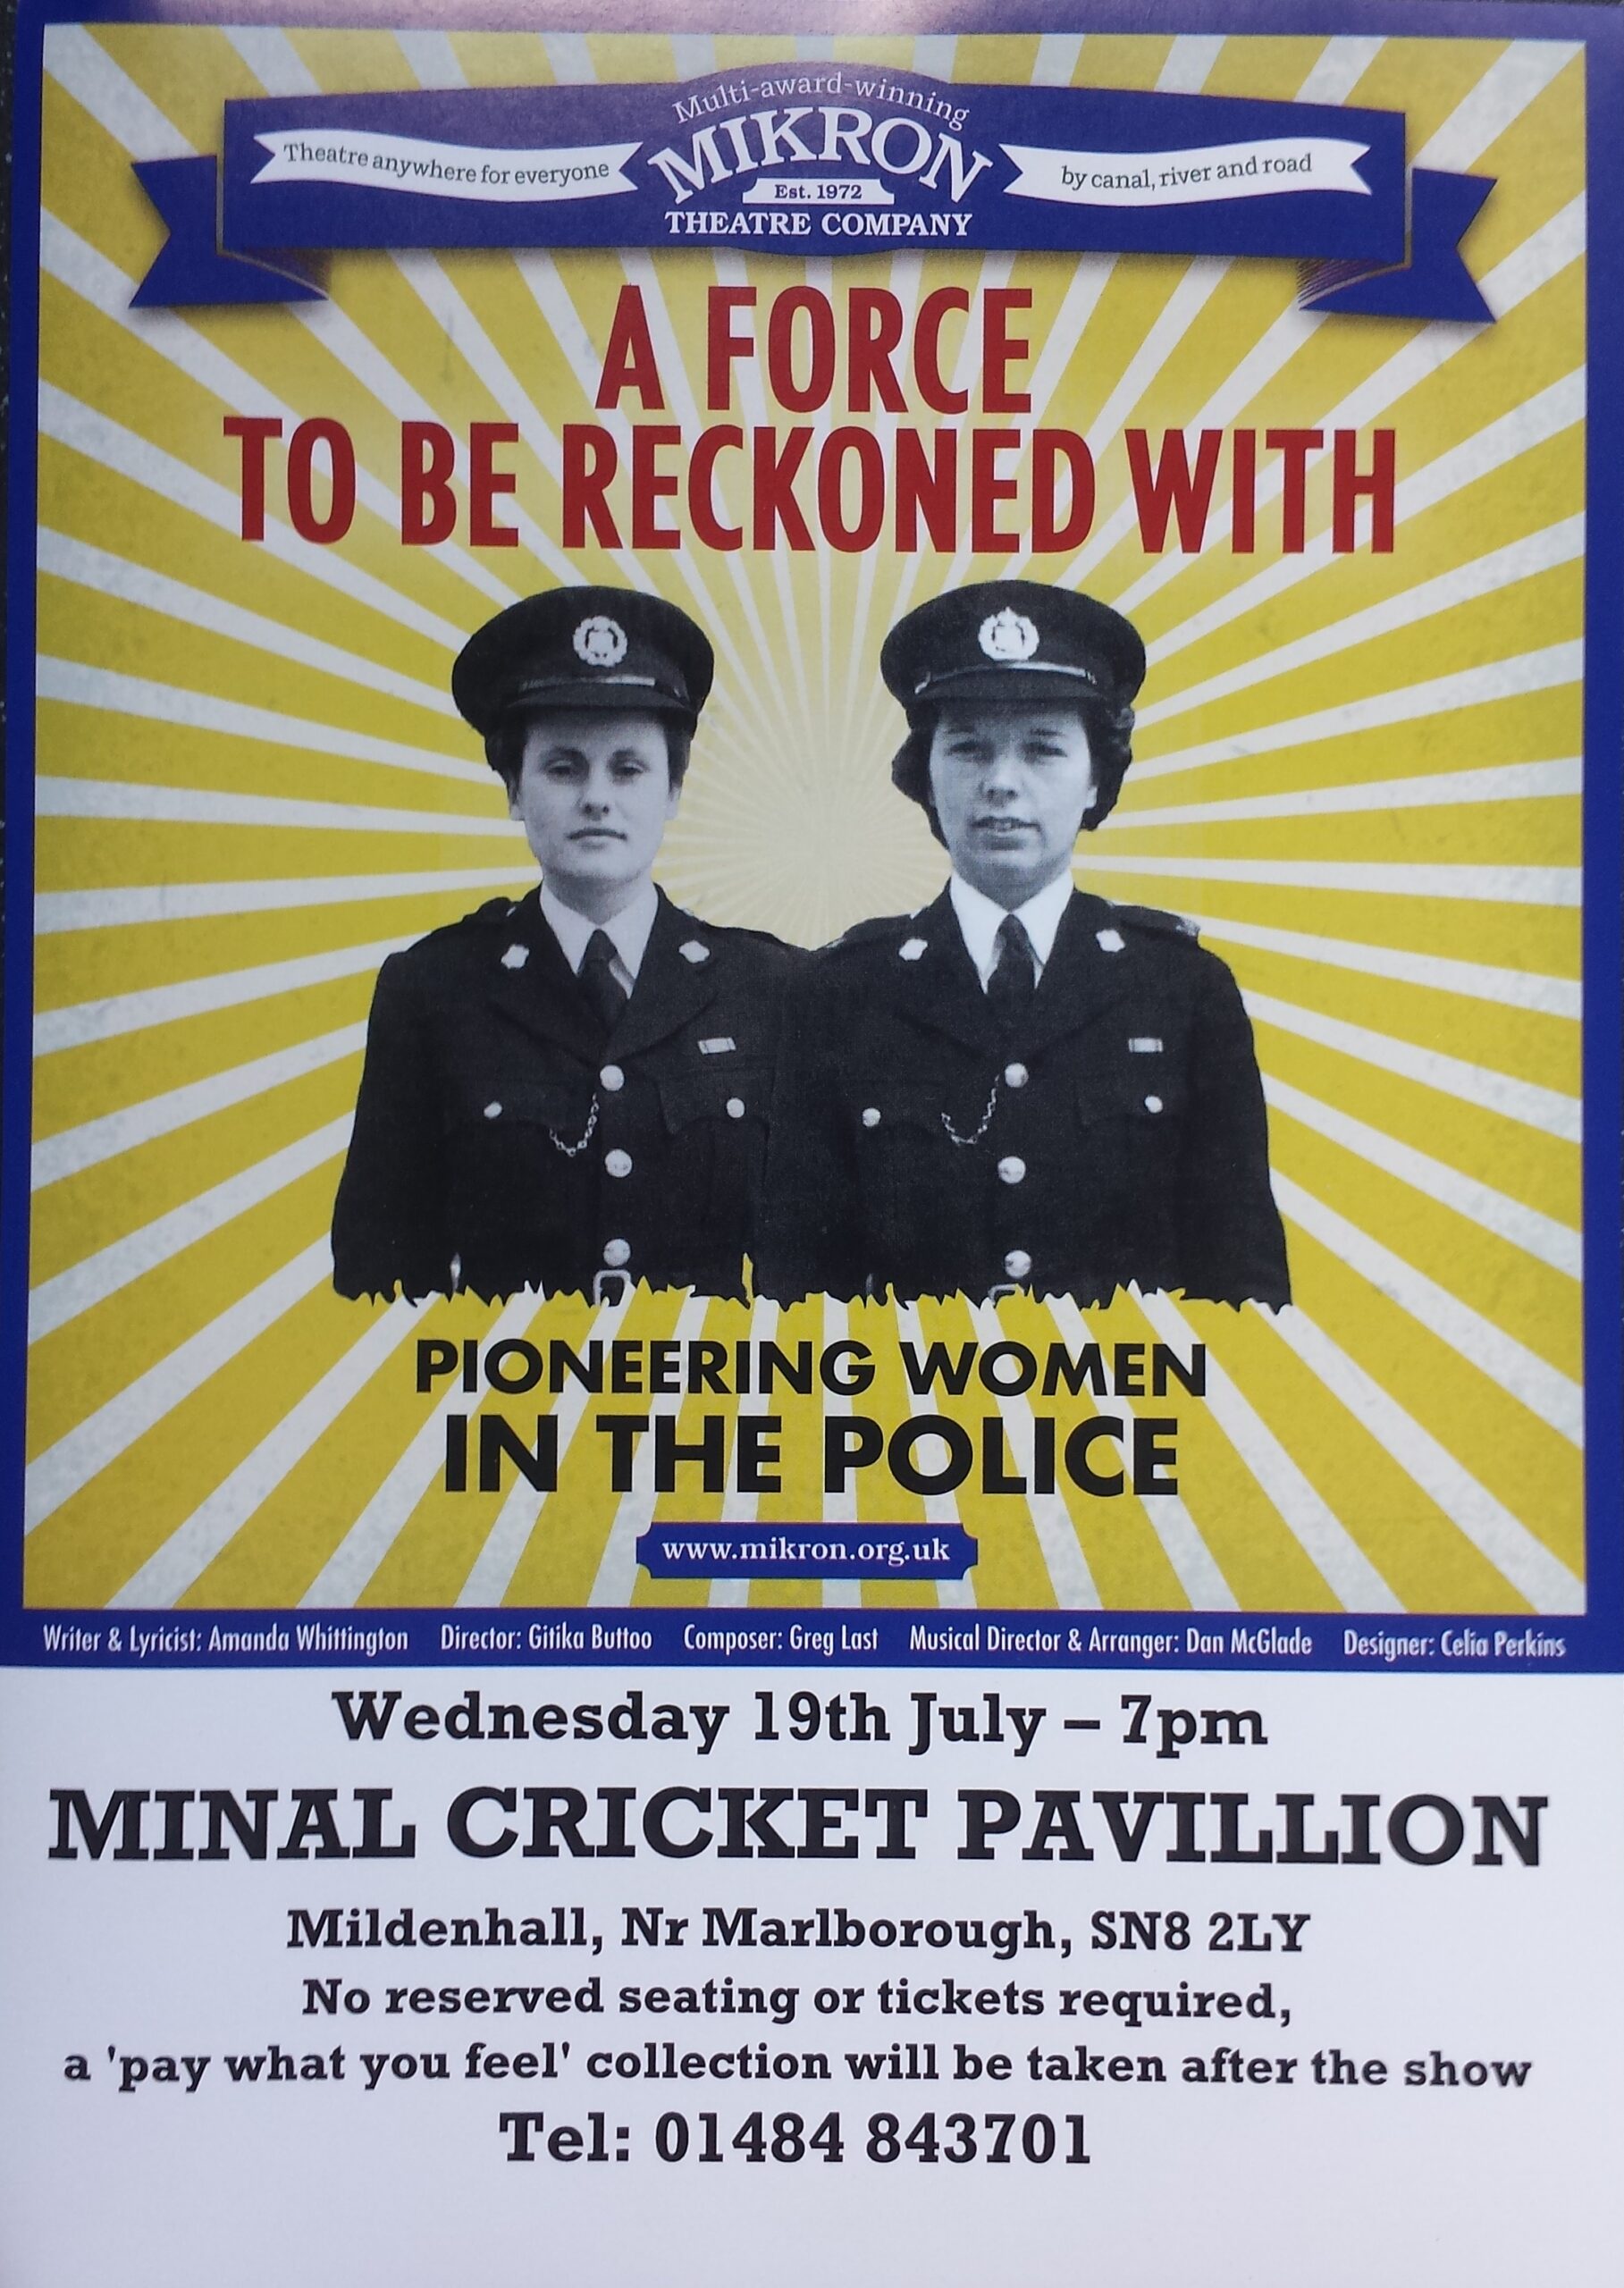 Mikron Theatre – A Force to be Reckoned with – Wednesday 19 July 7.00pm